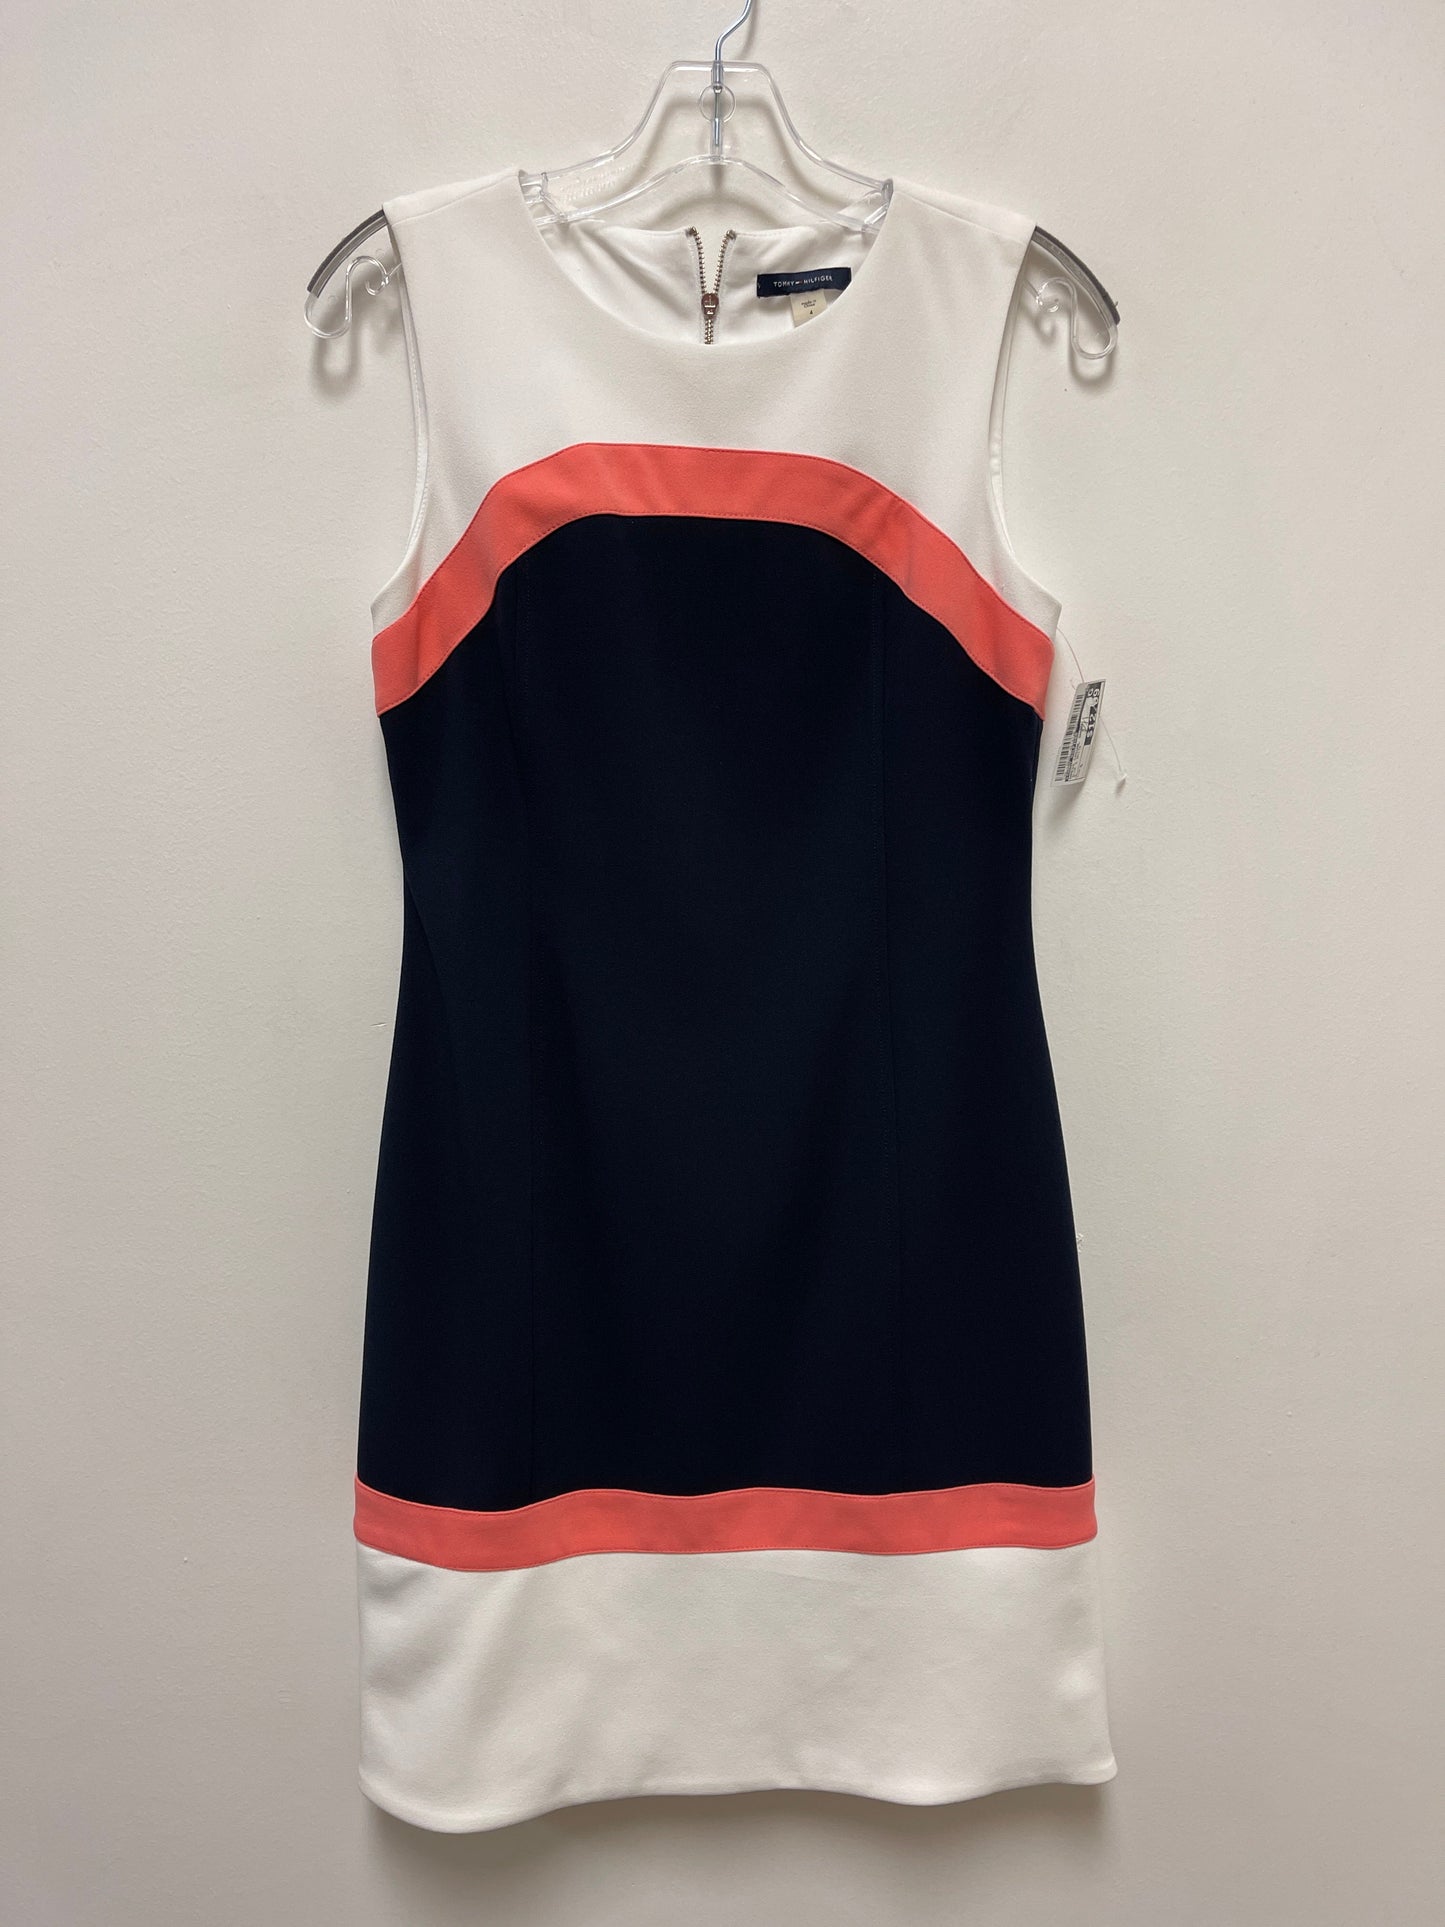 Blue & White Dress Casual Short Tommy Hilfiger, Size S